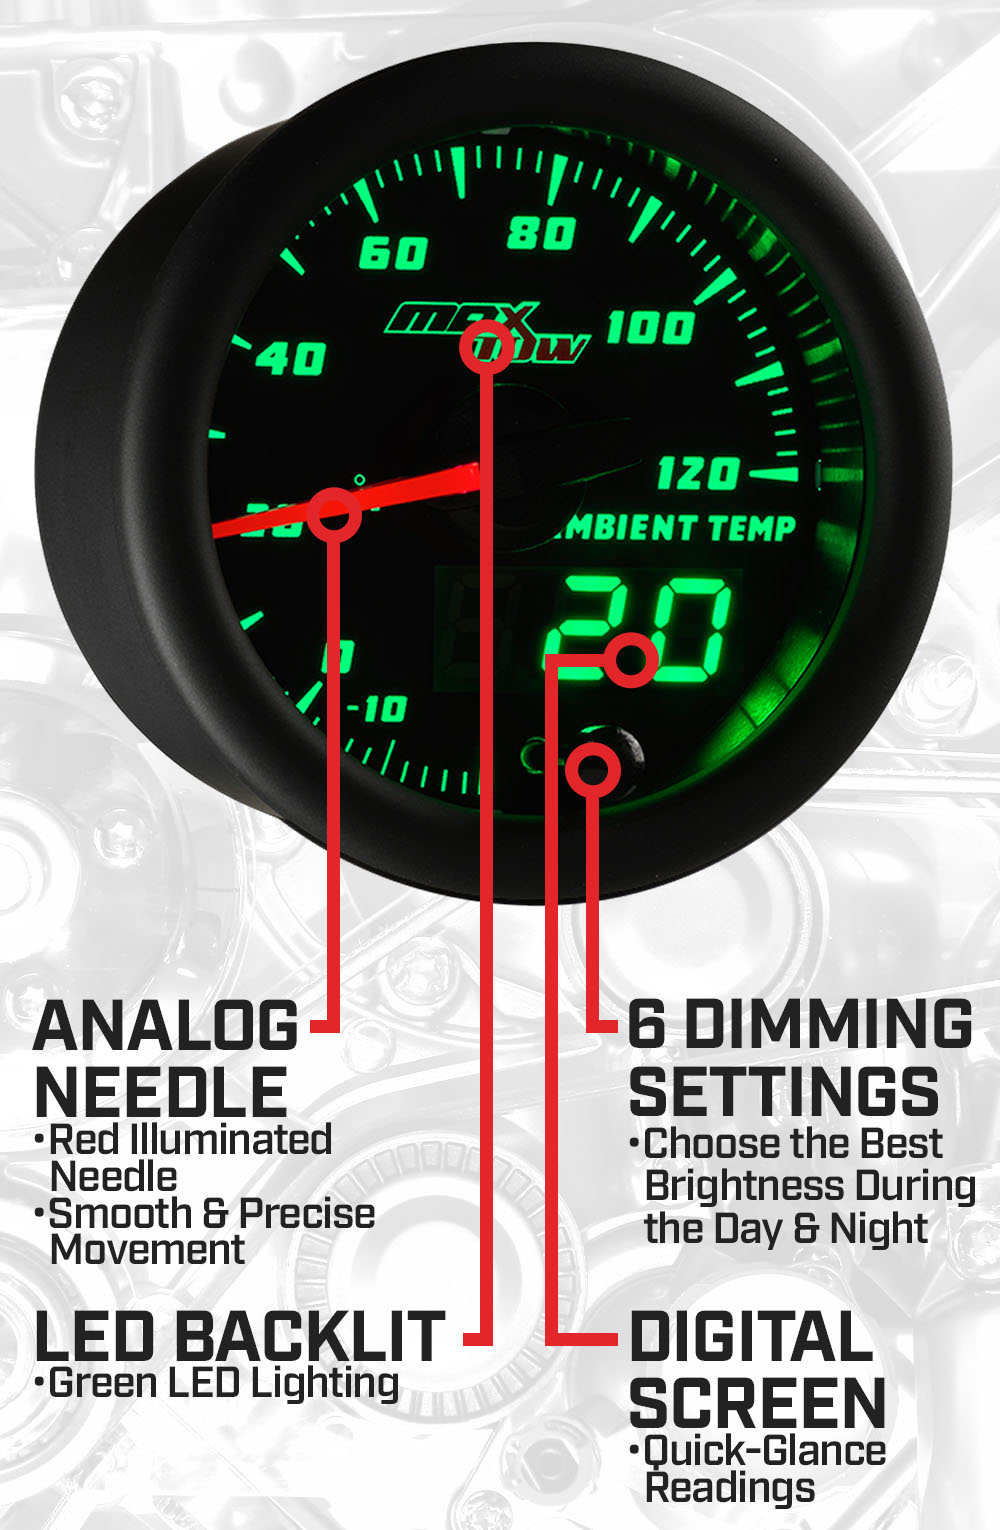 Black & Green Double Vision Ambient Temperature Gauge Features